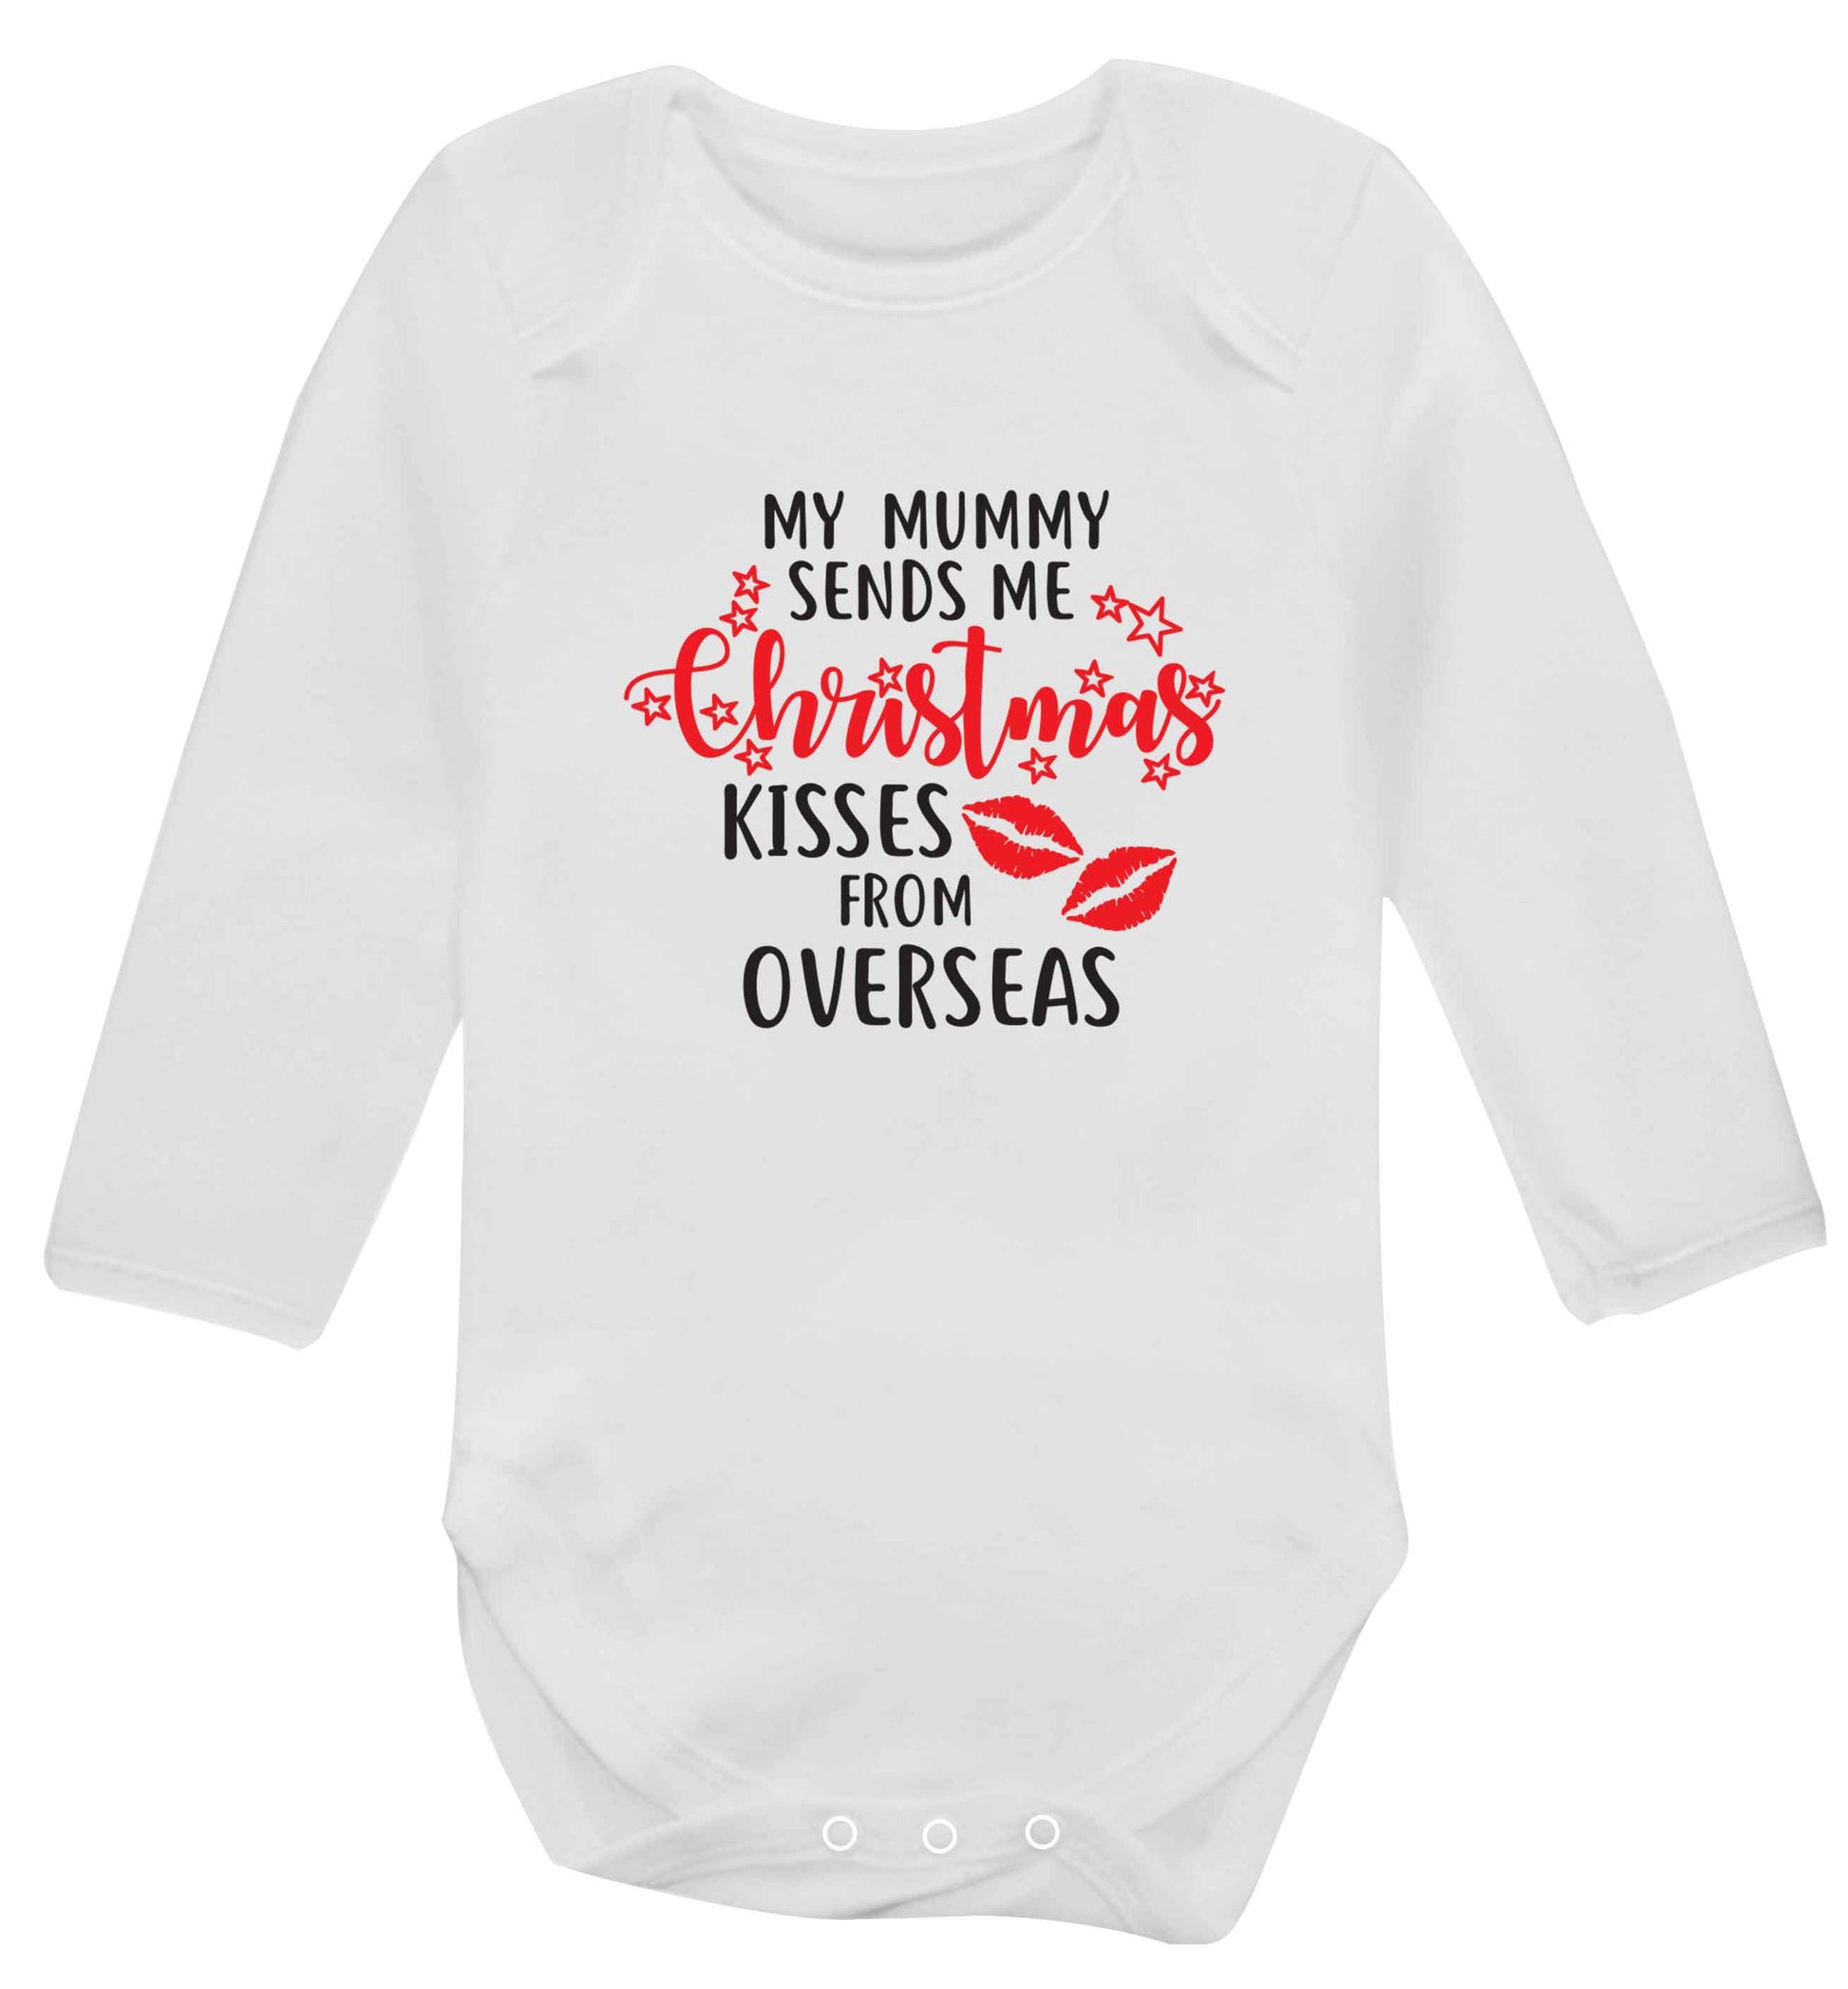 Mummy Christmas Kisses Overseas baby vest long sleeved white 6-12 months